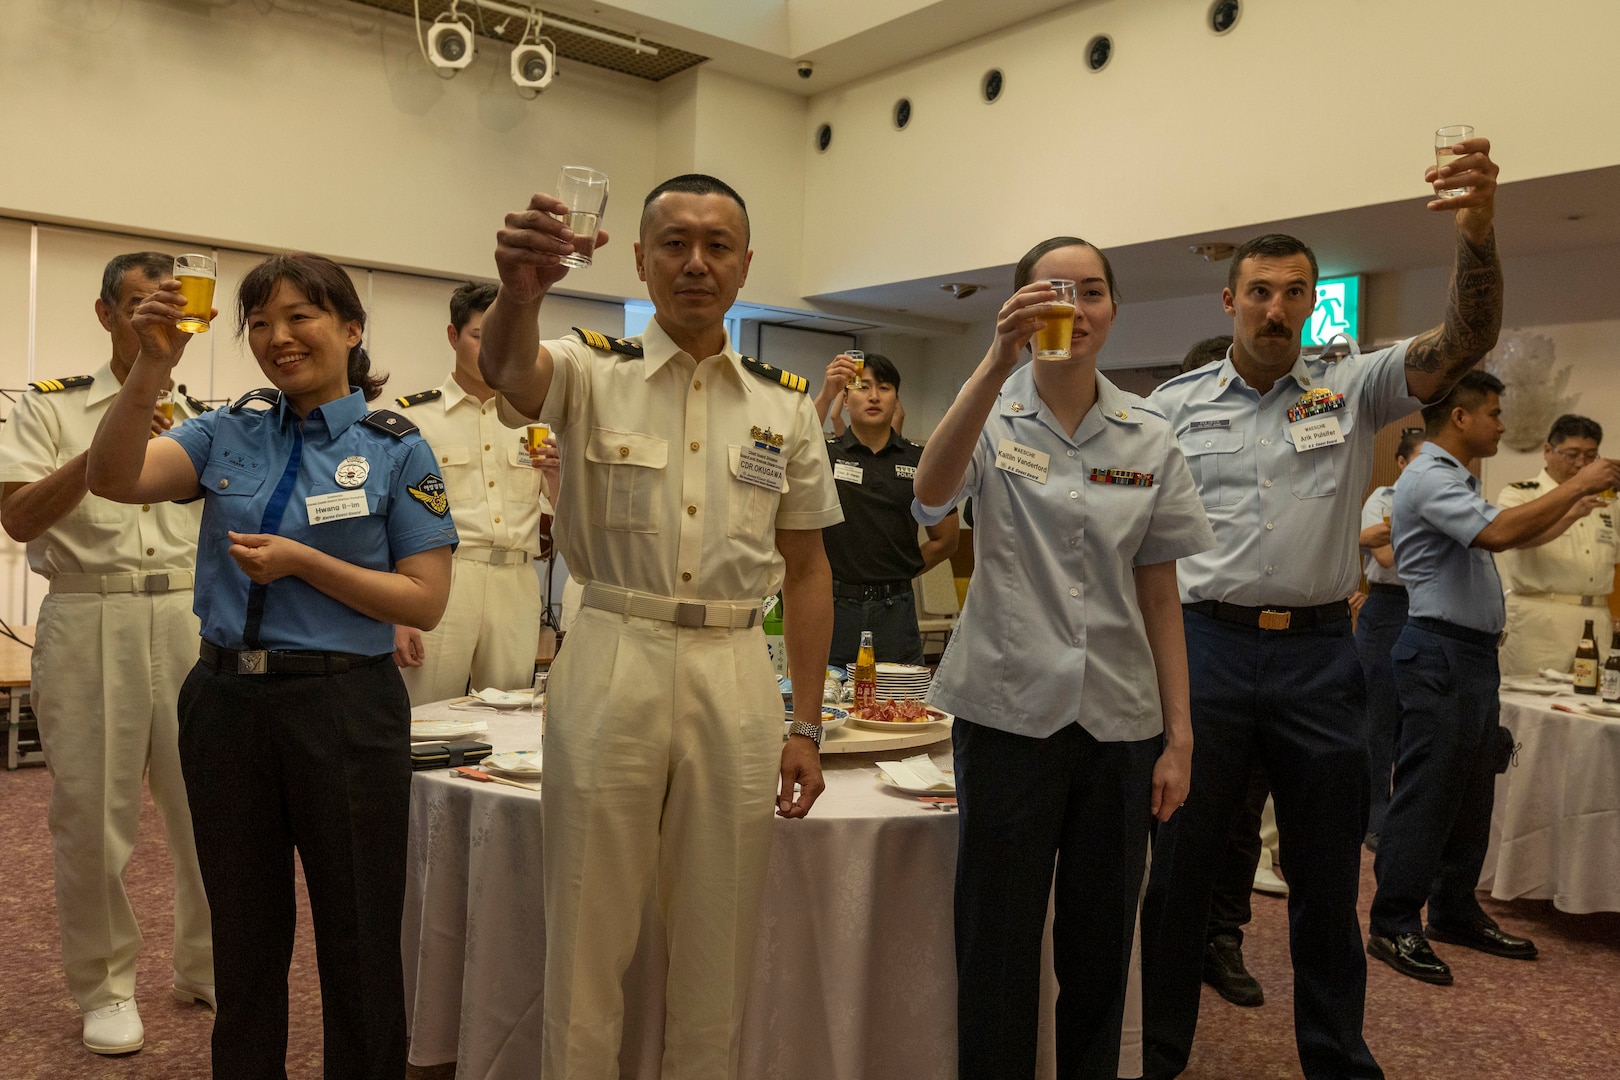 Members of the United States, Japanese, and Republic of Korea Coast Guards raise a toast during a reception ceremony in Maizuru, Japan, June 5, 2024. The reception was held to commemorate the first trilateral training between the United States, Japanese and Republic of Korea Coast Guards. The U.S. Coast Guard has operated in the Indo-Pacific for more than 150 years, and the service is increasing efforts through targeted patrols with our National Security Cutters, Fast Response Cutters and other activities in support of Coast Guard missions to enhance our partnership. (U.S. Marine Corps photo by Cpl. Elijah Murphy)